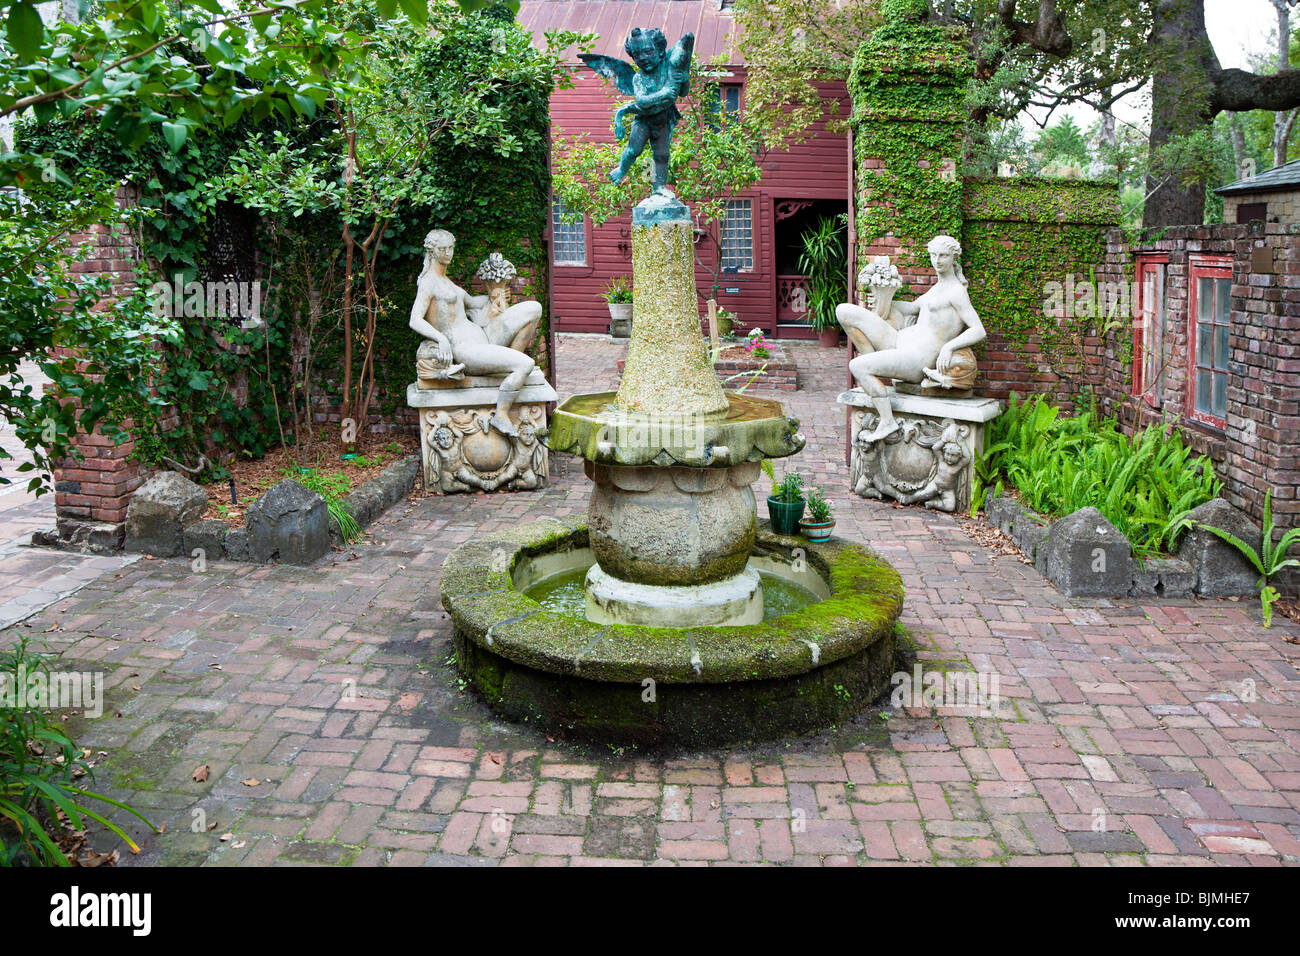 St. Augustine, FL - Jan 2009 - Quaint brick paved courtyard with sculptures and fountain in St. Augustine, Florida Stock Photo